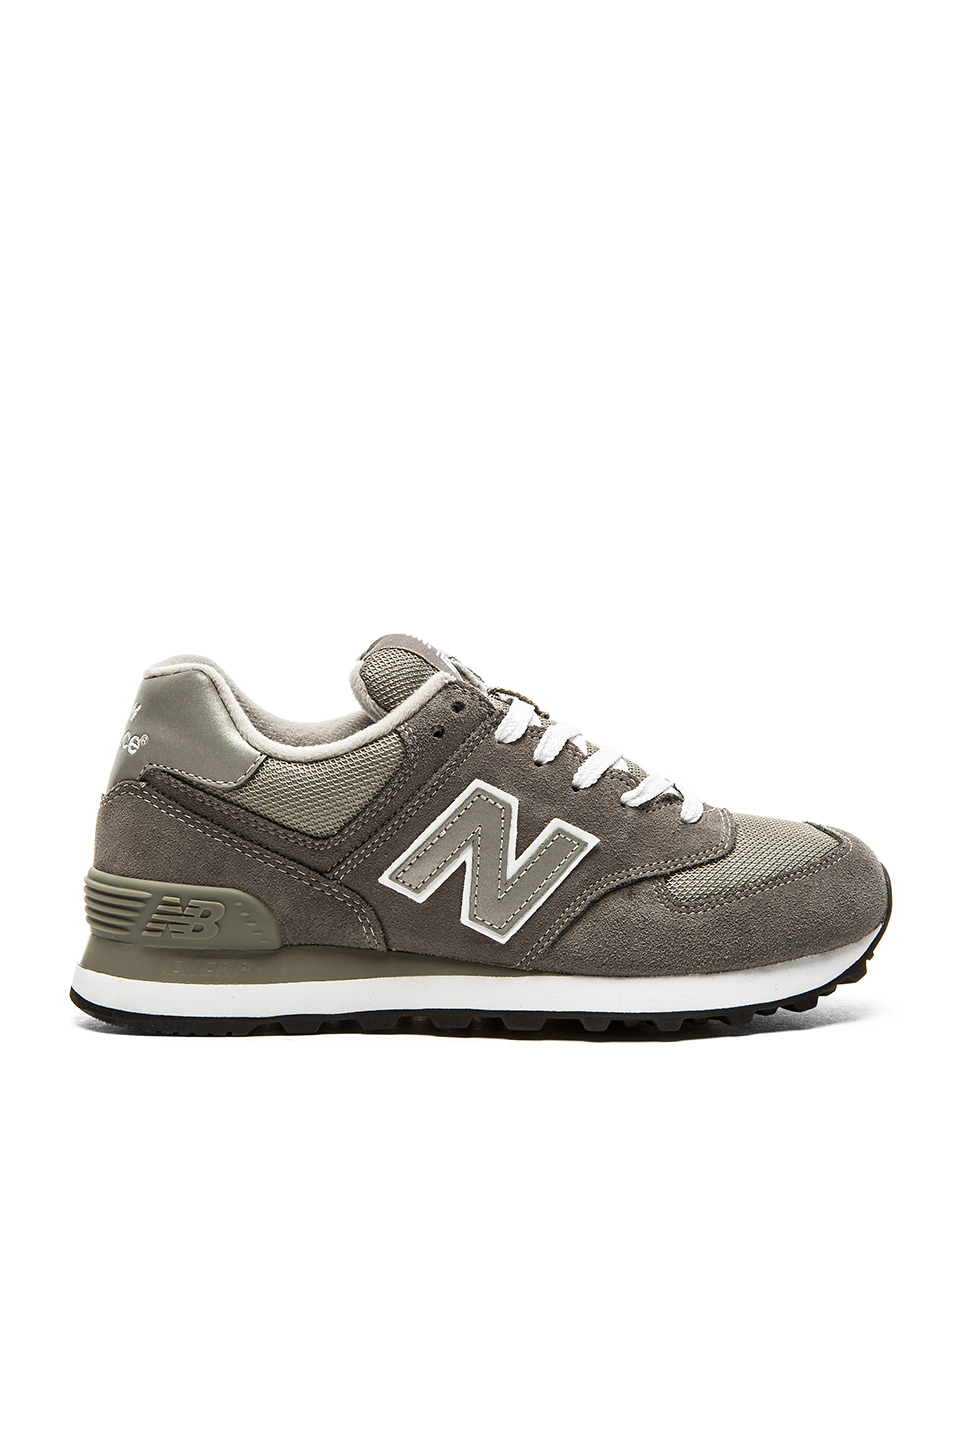 New Balance Leather 574 Core Collection Sneaker in Grey (Gray) - Lyst